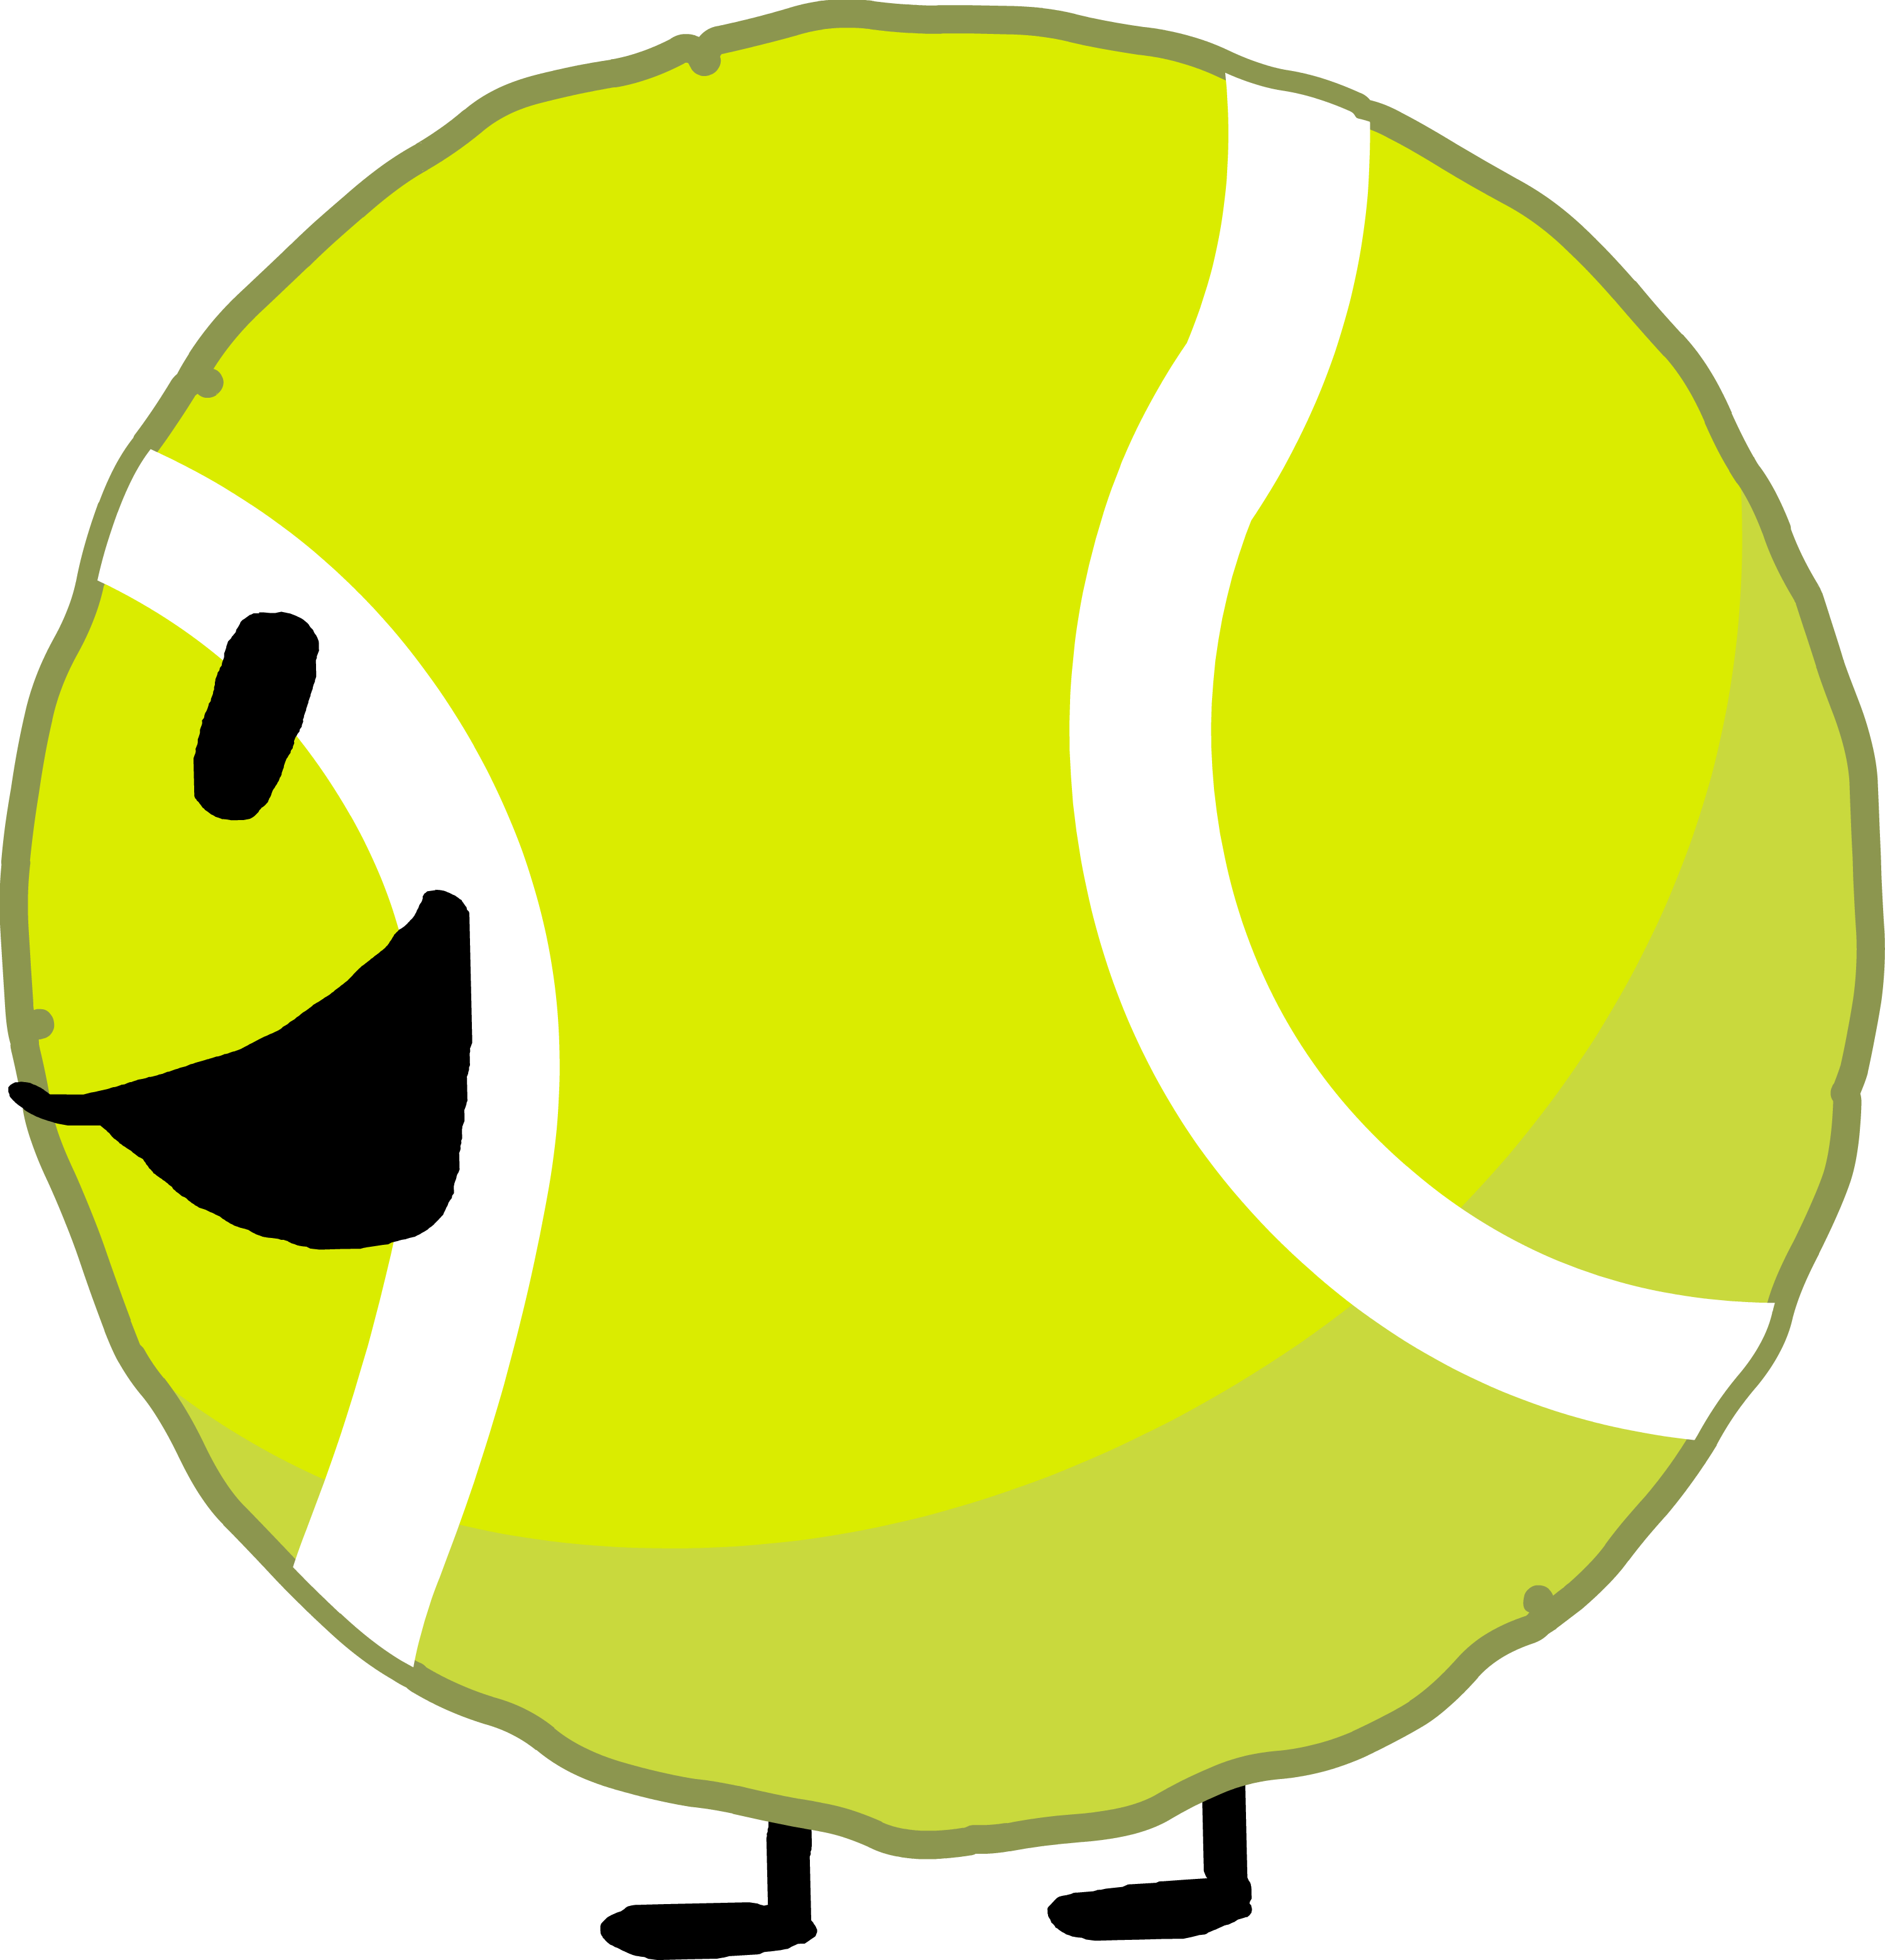 Suggest a BFDI character and a Super Mario power-up if you want, the most  upvoted suggestion will be designed. Here are some examples: Firey with the  Cat Bell, Tennis Ball with the